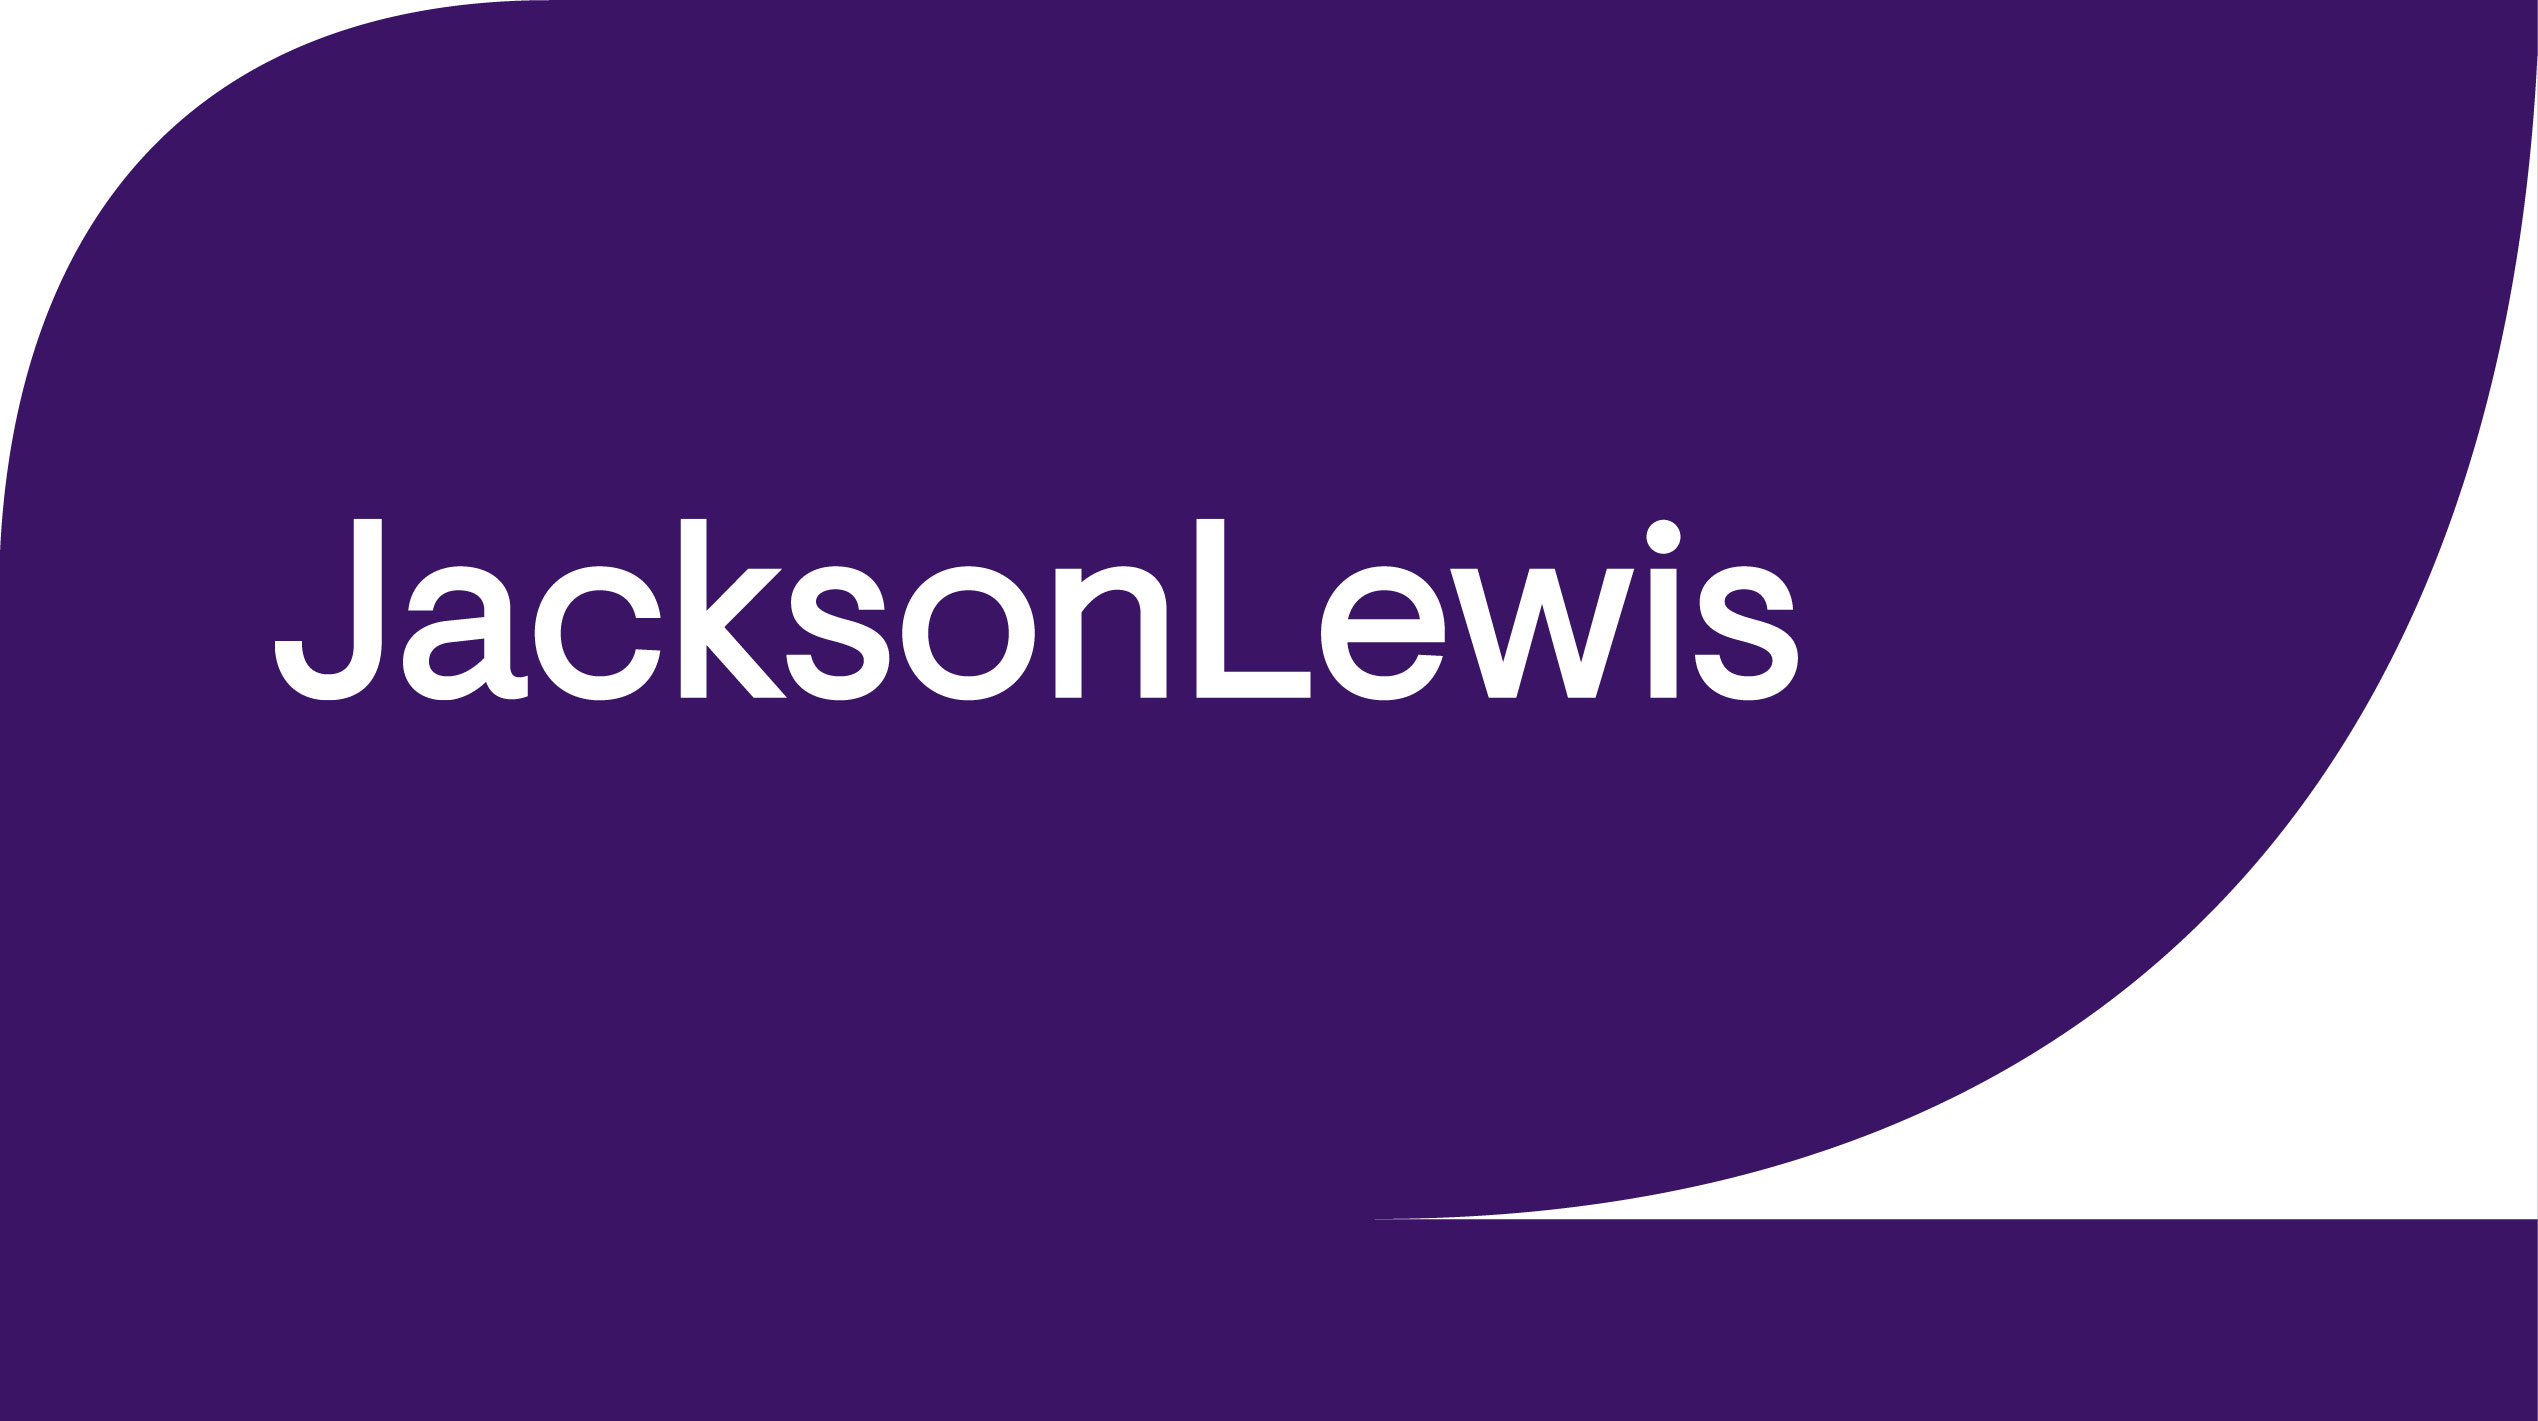 A graphic with Jackson Lewis's logo